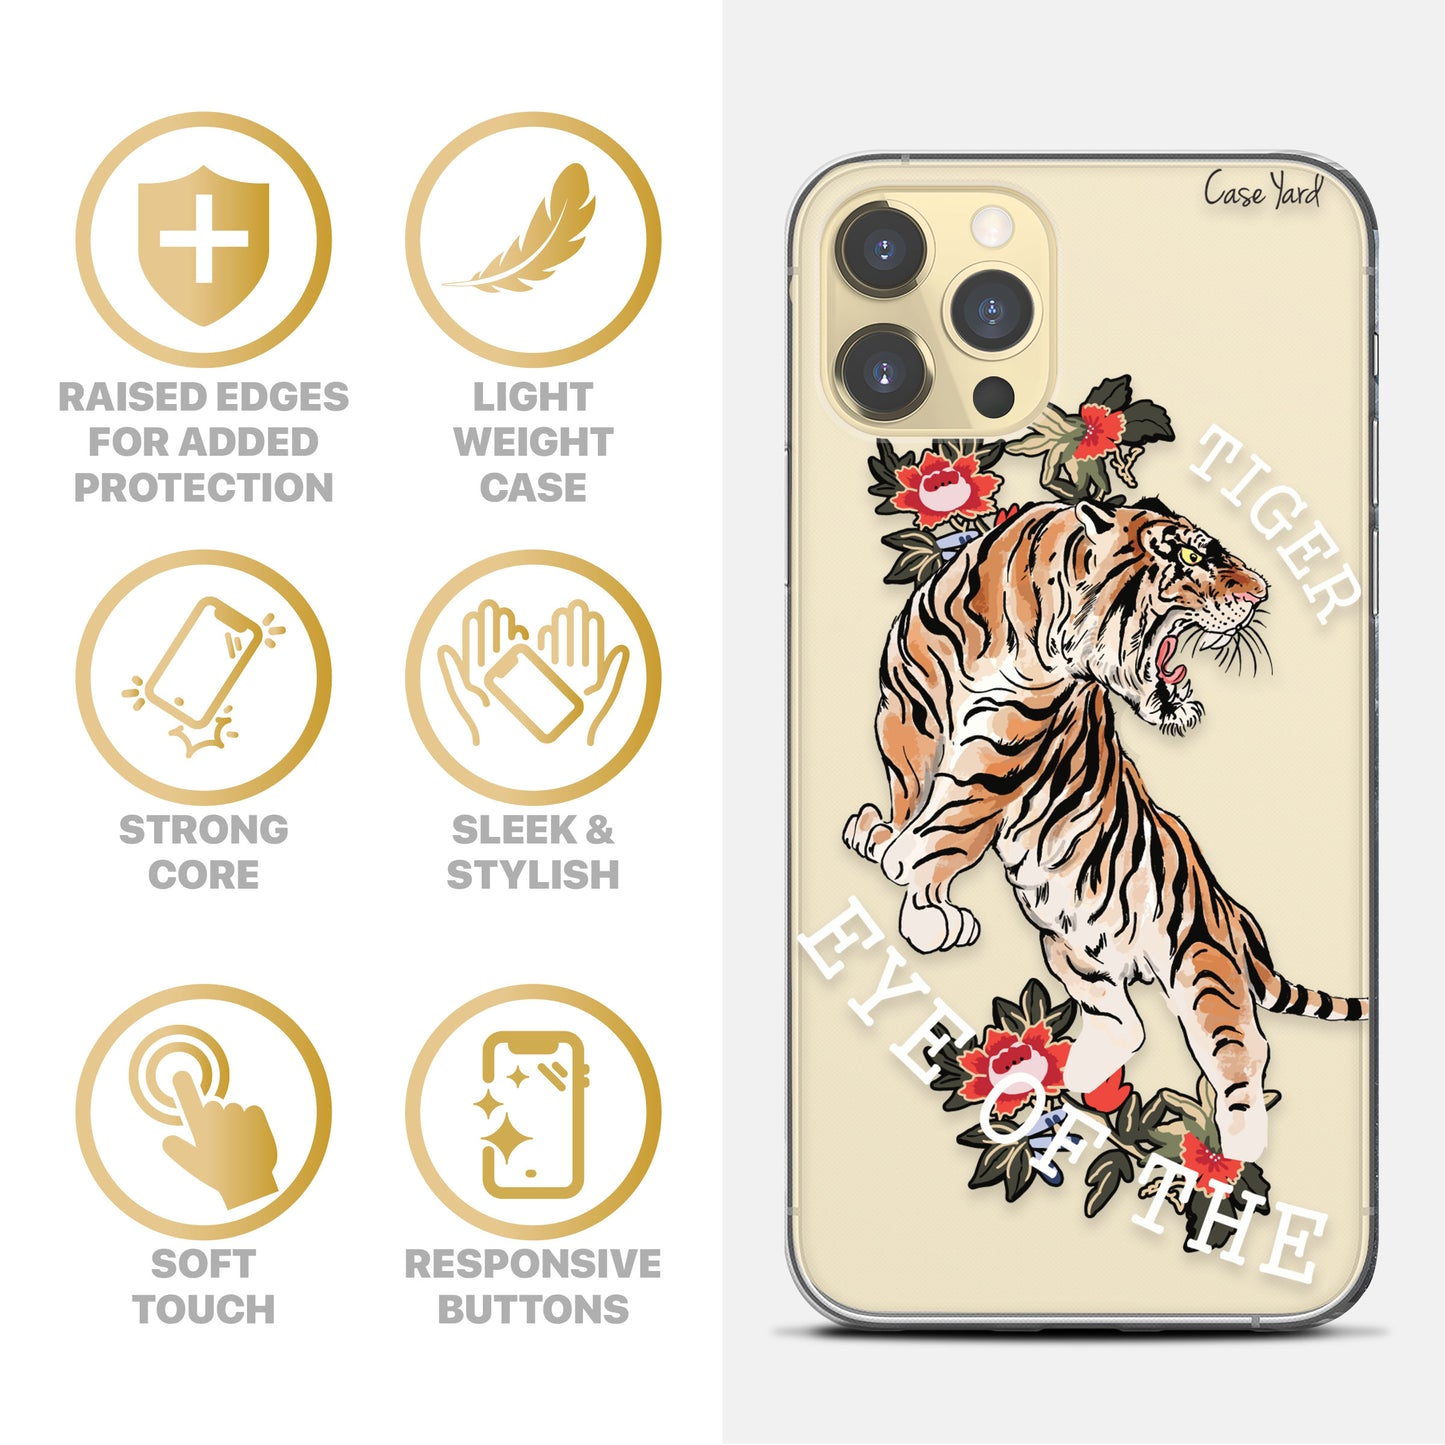 TPU Case Clear case with (Eye of the Tiger) Design for iPhone & Samsung Phones